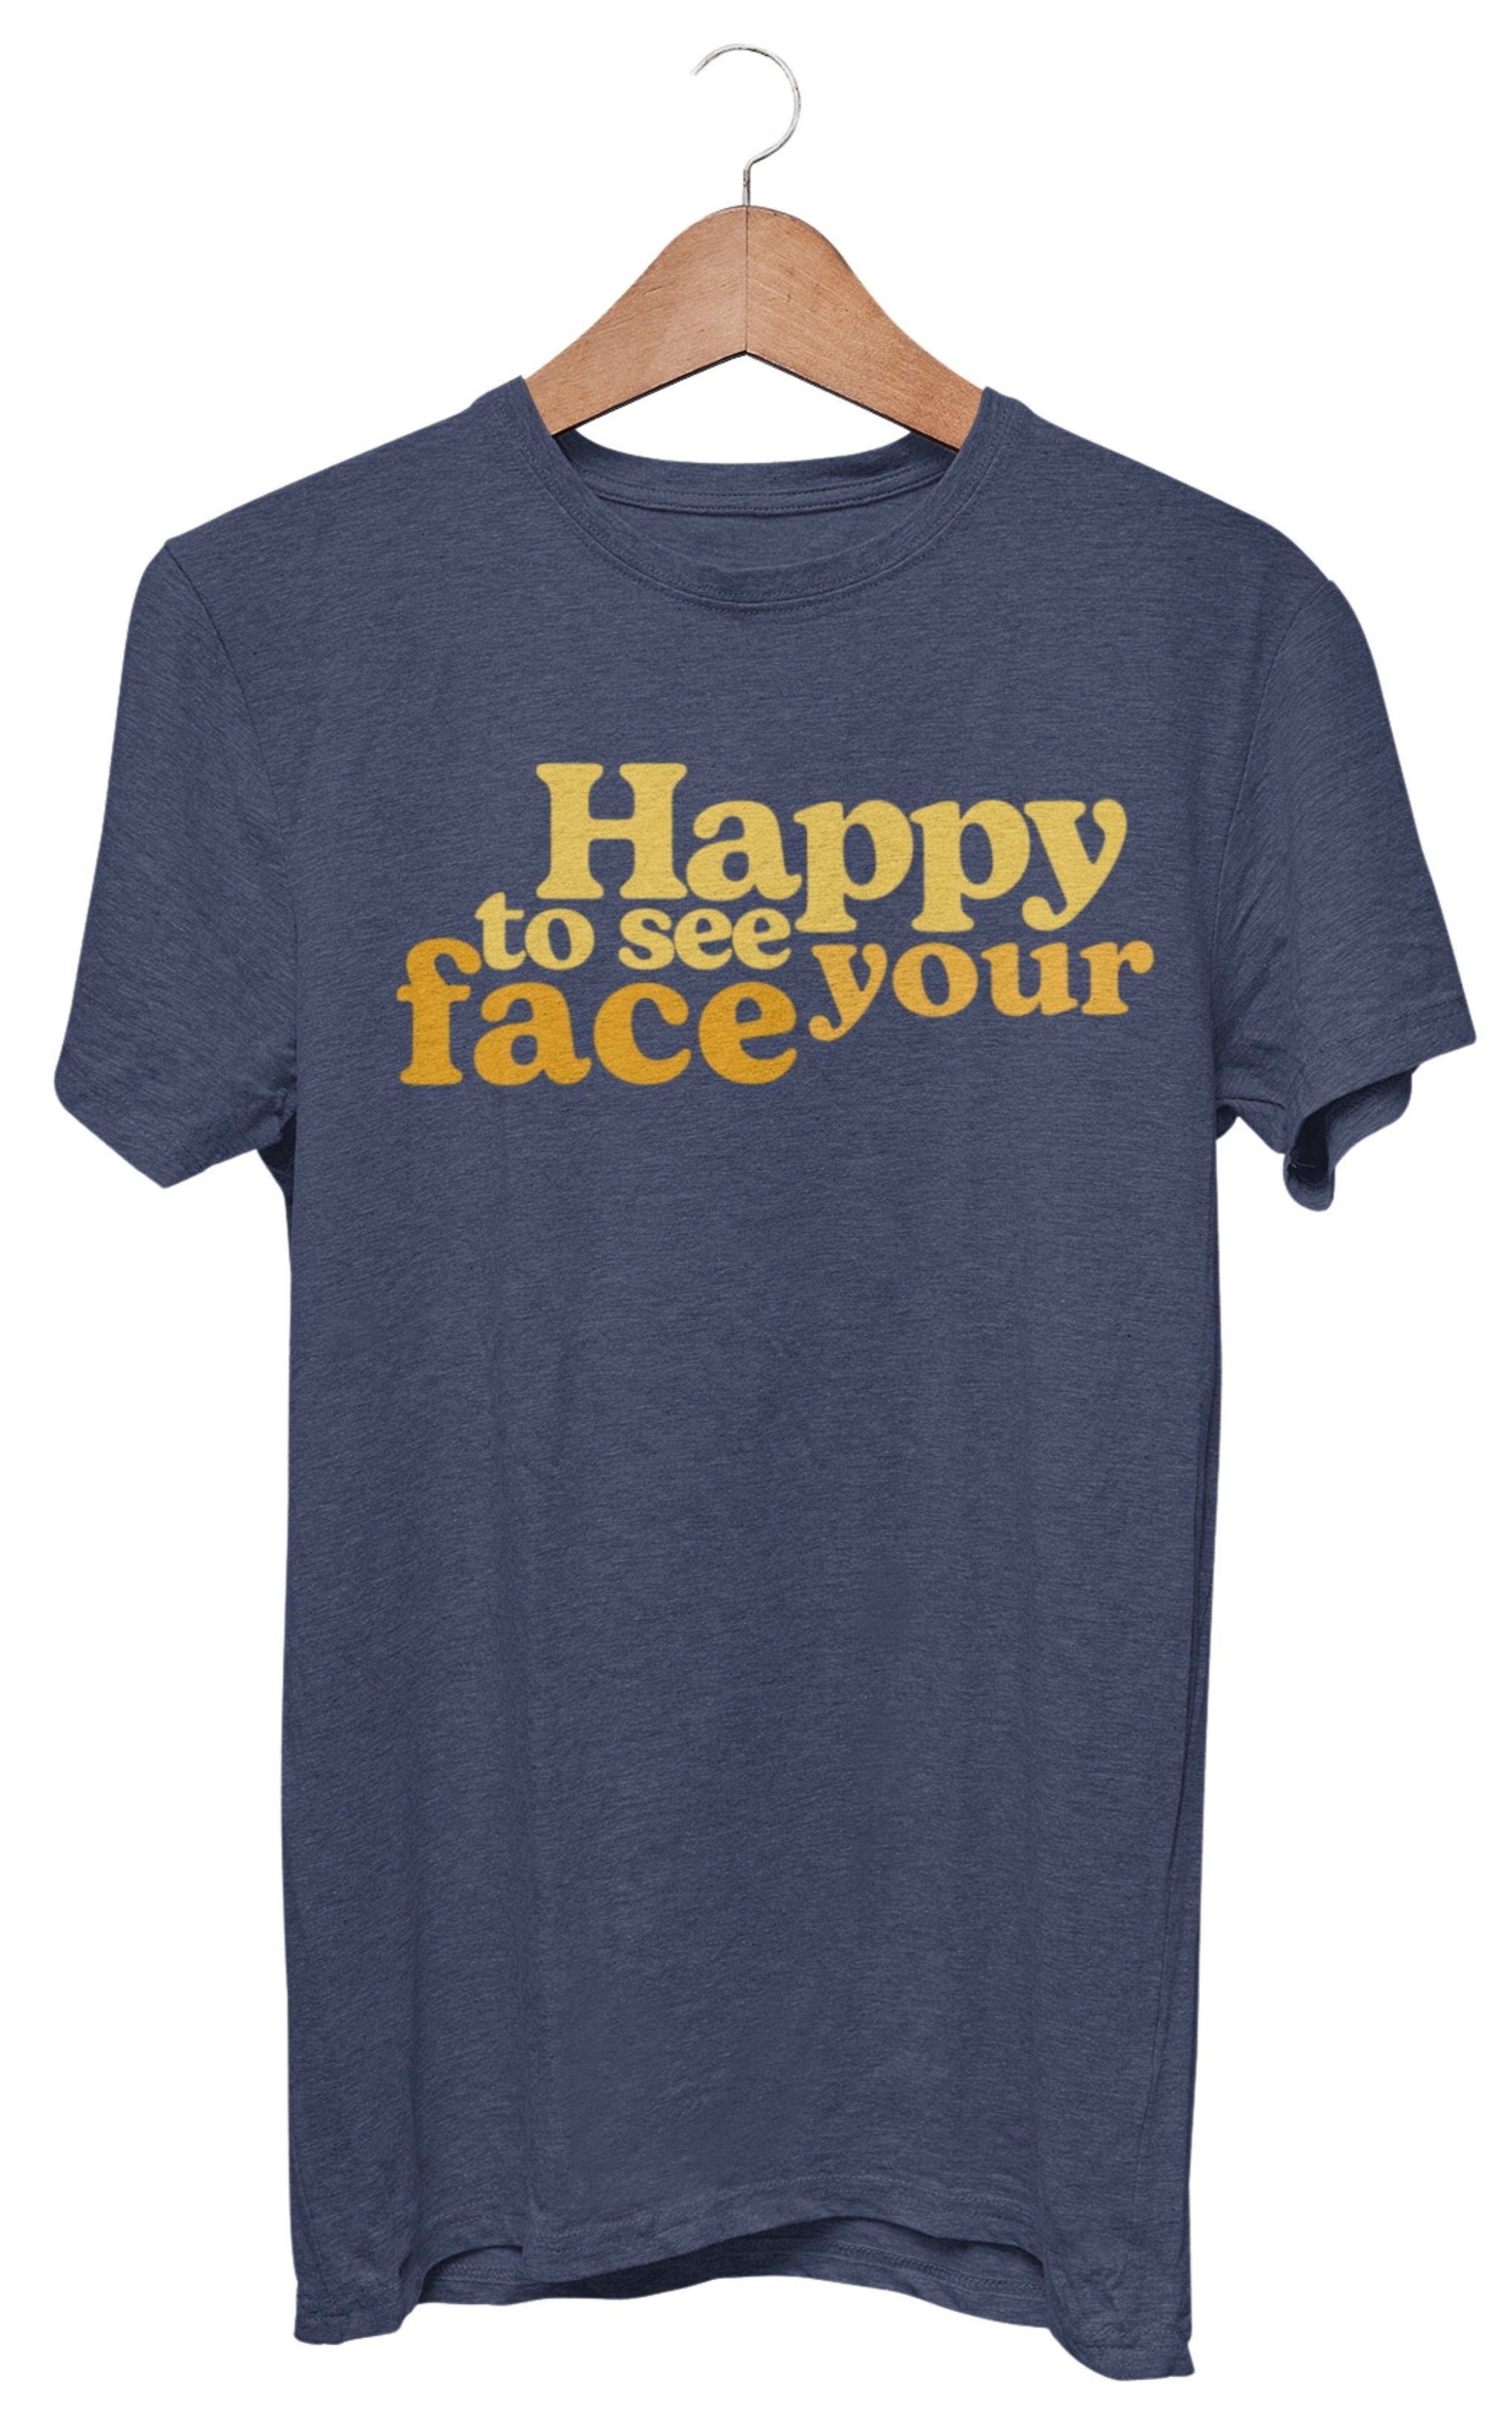 Happy to see your face t-shirt